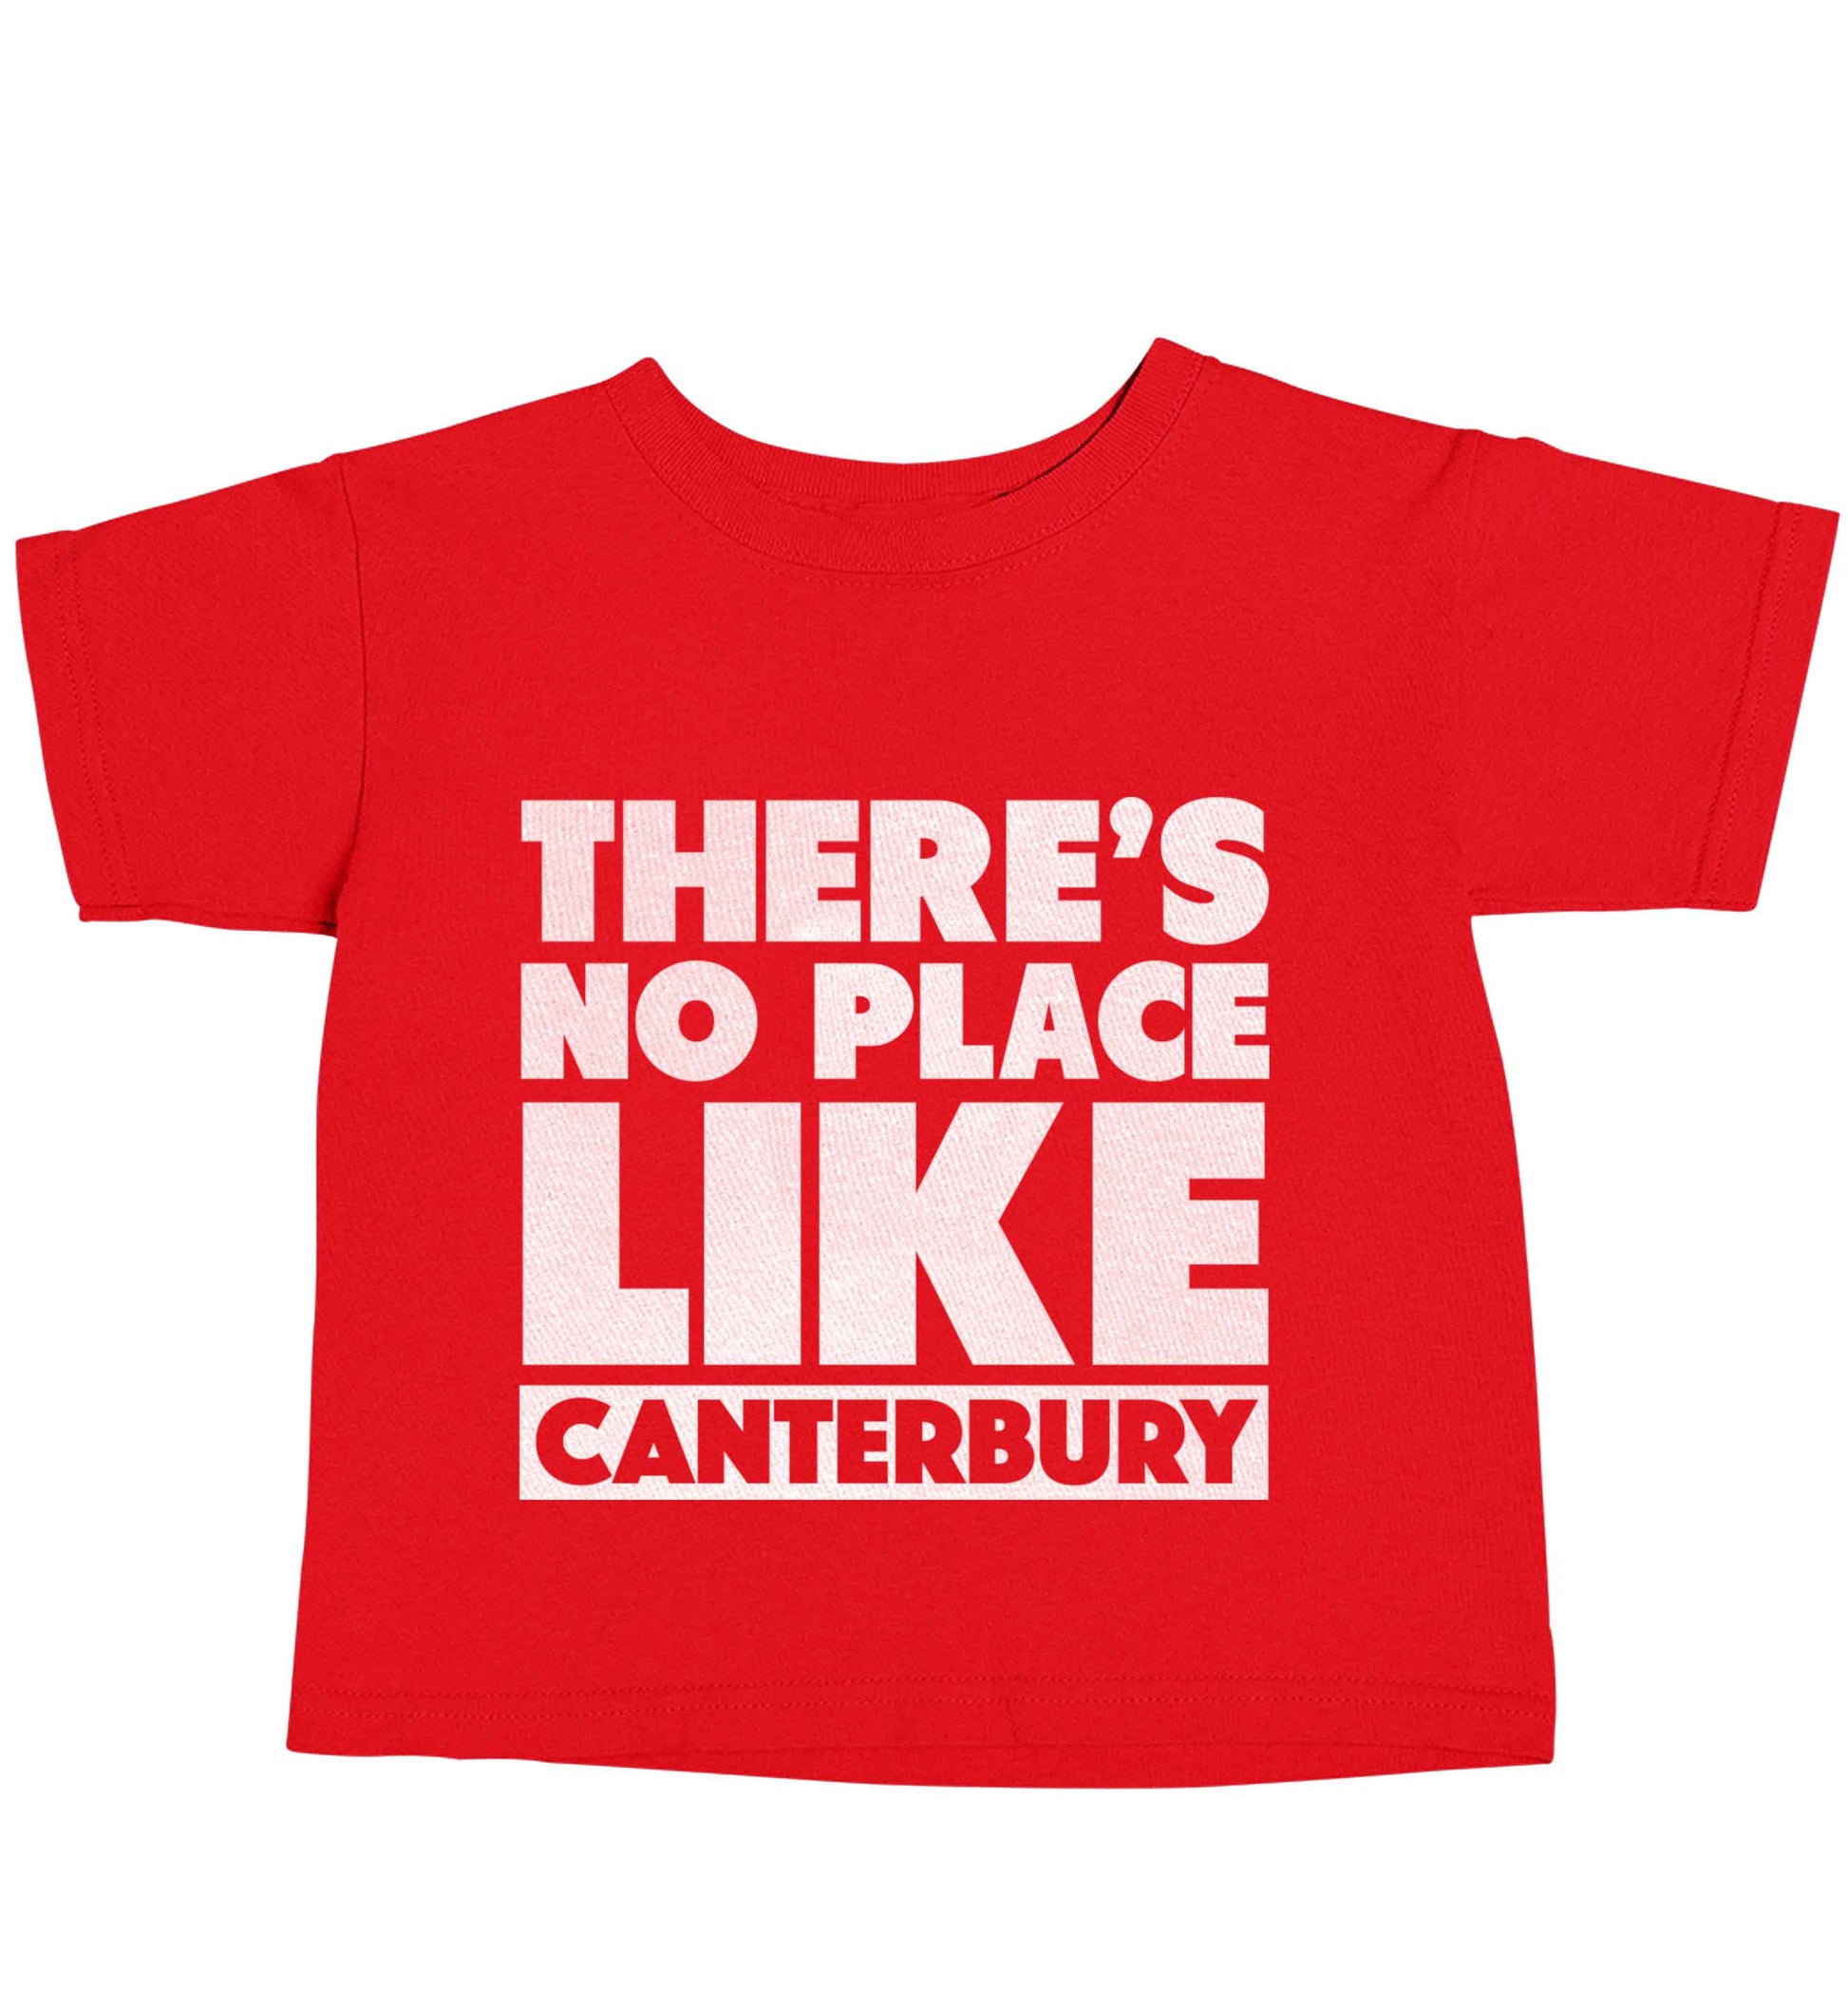 There's no place like Canterbury red baby toddler Tshirt 2 Years